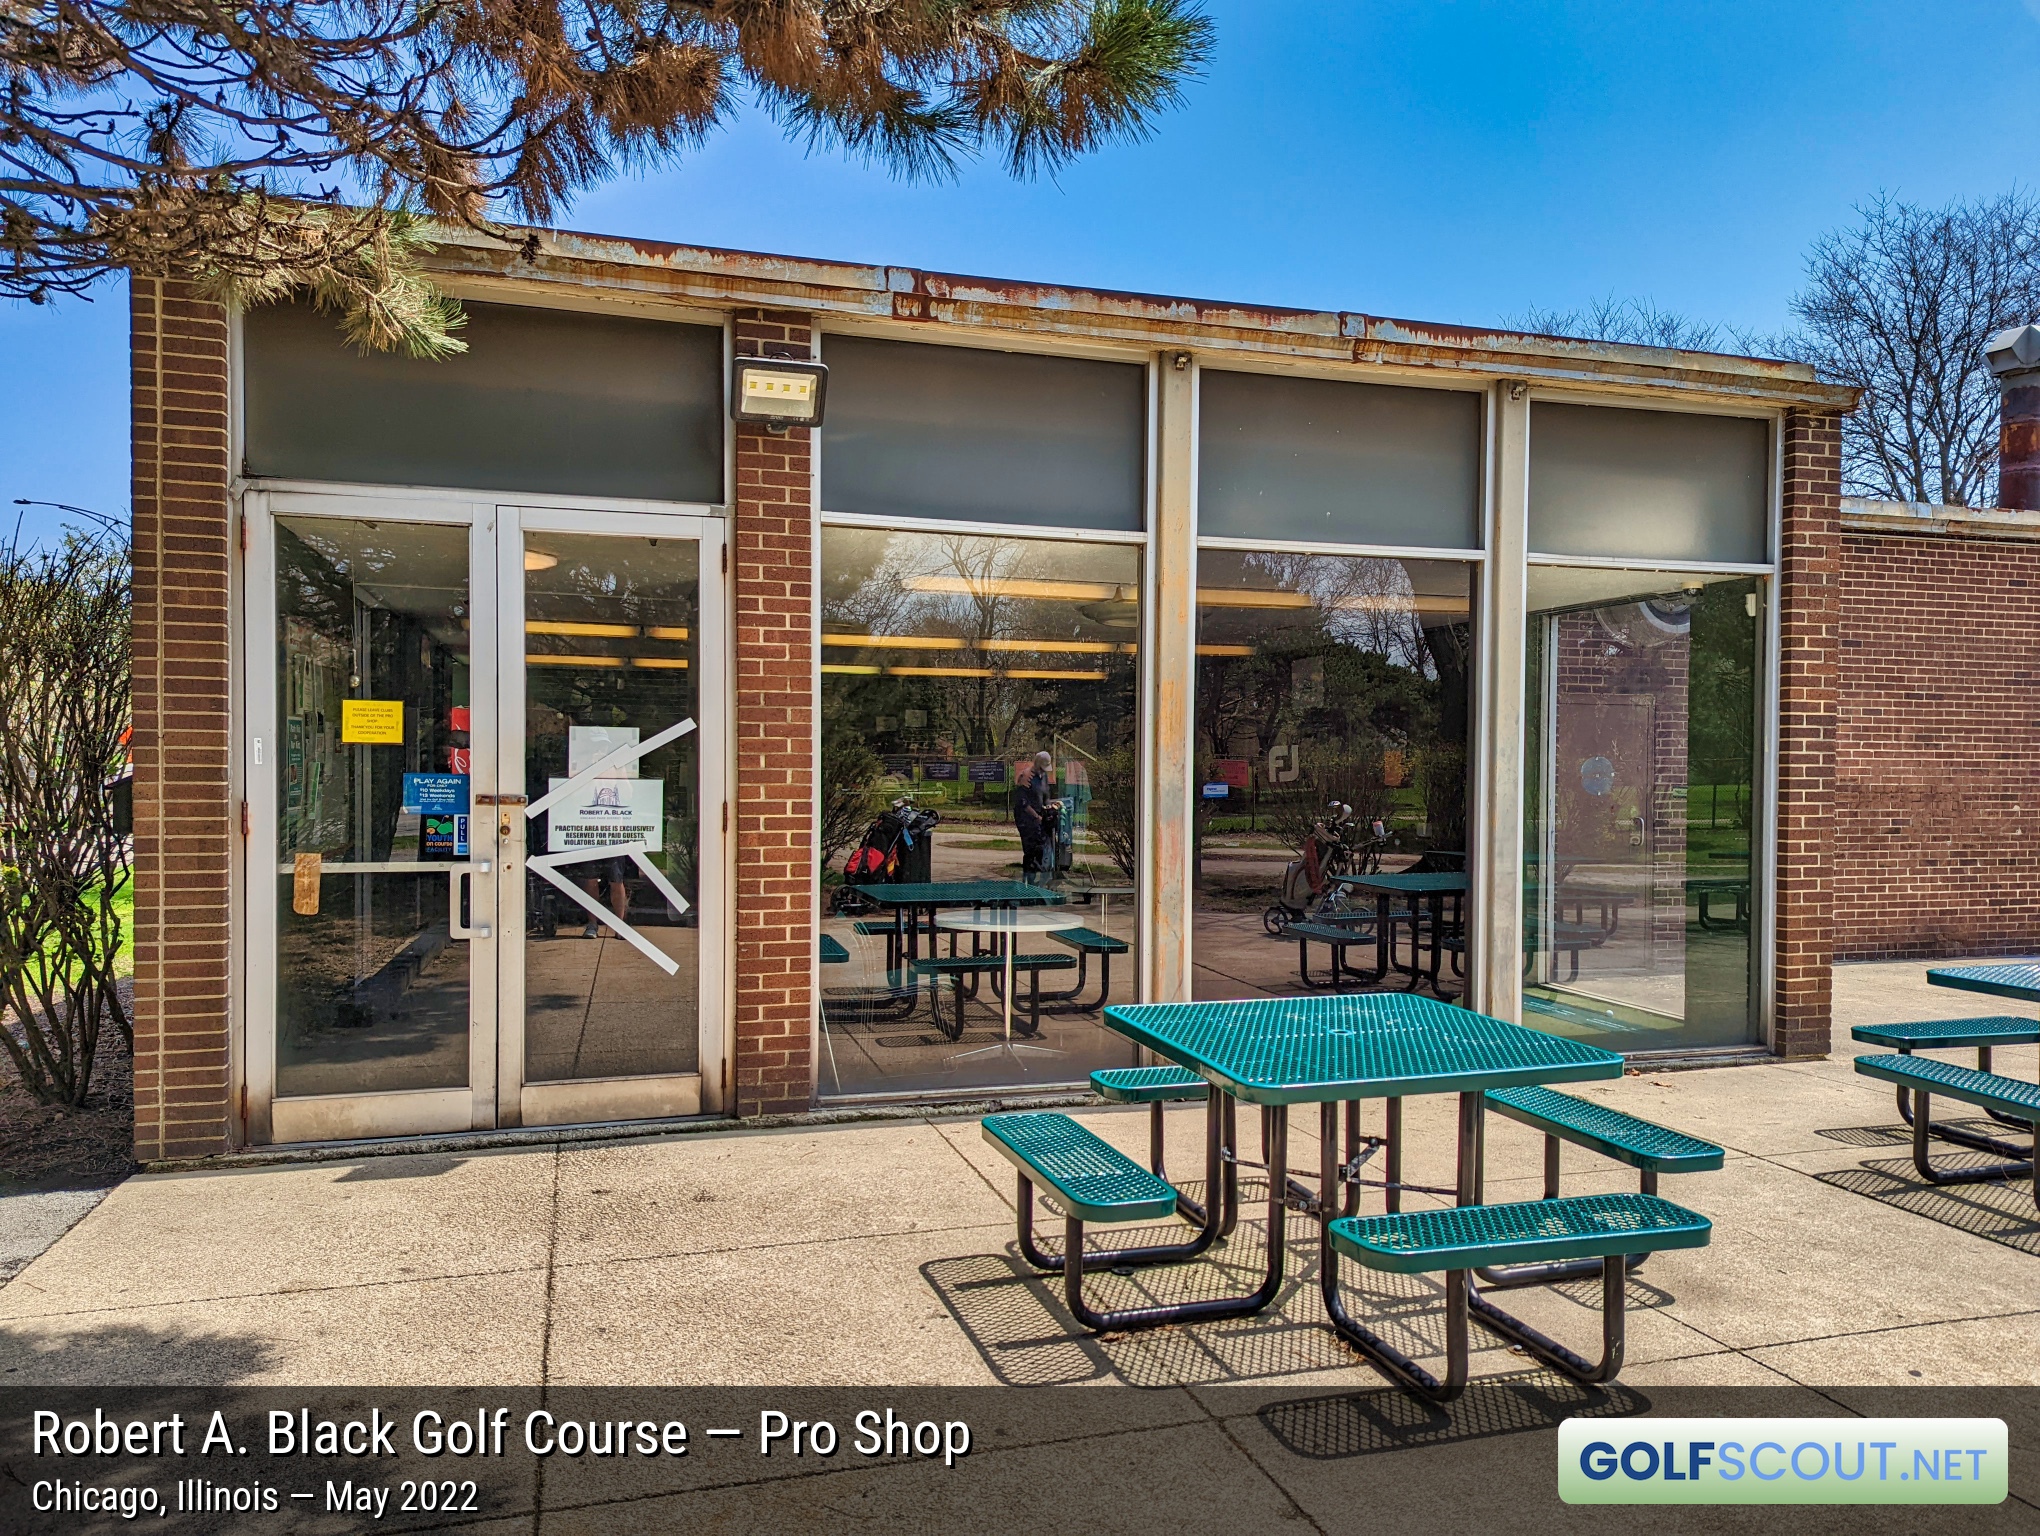 Photo of the pro shop at Robert A. Black Golf Course in Chicago, Illinois. 